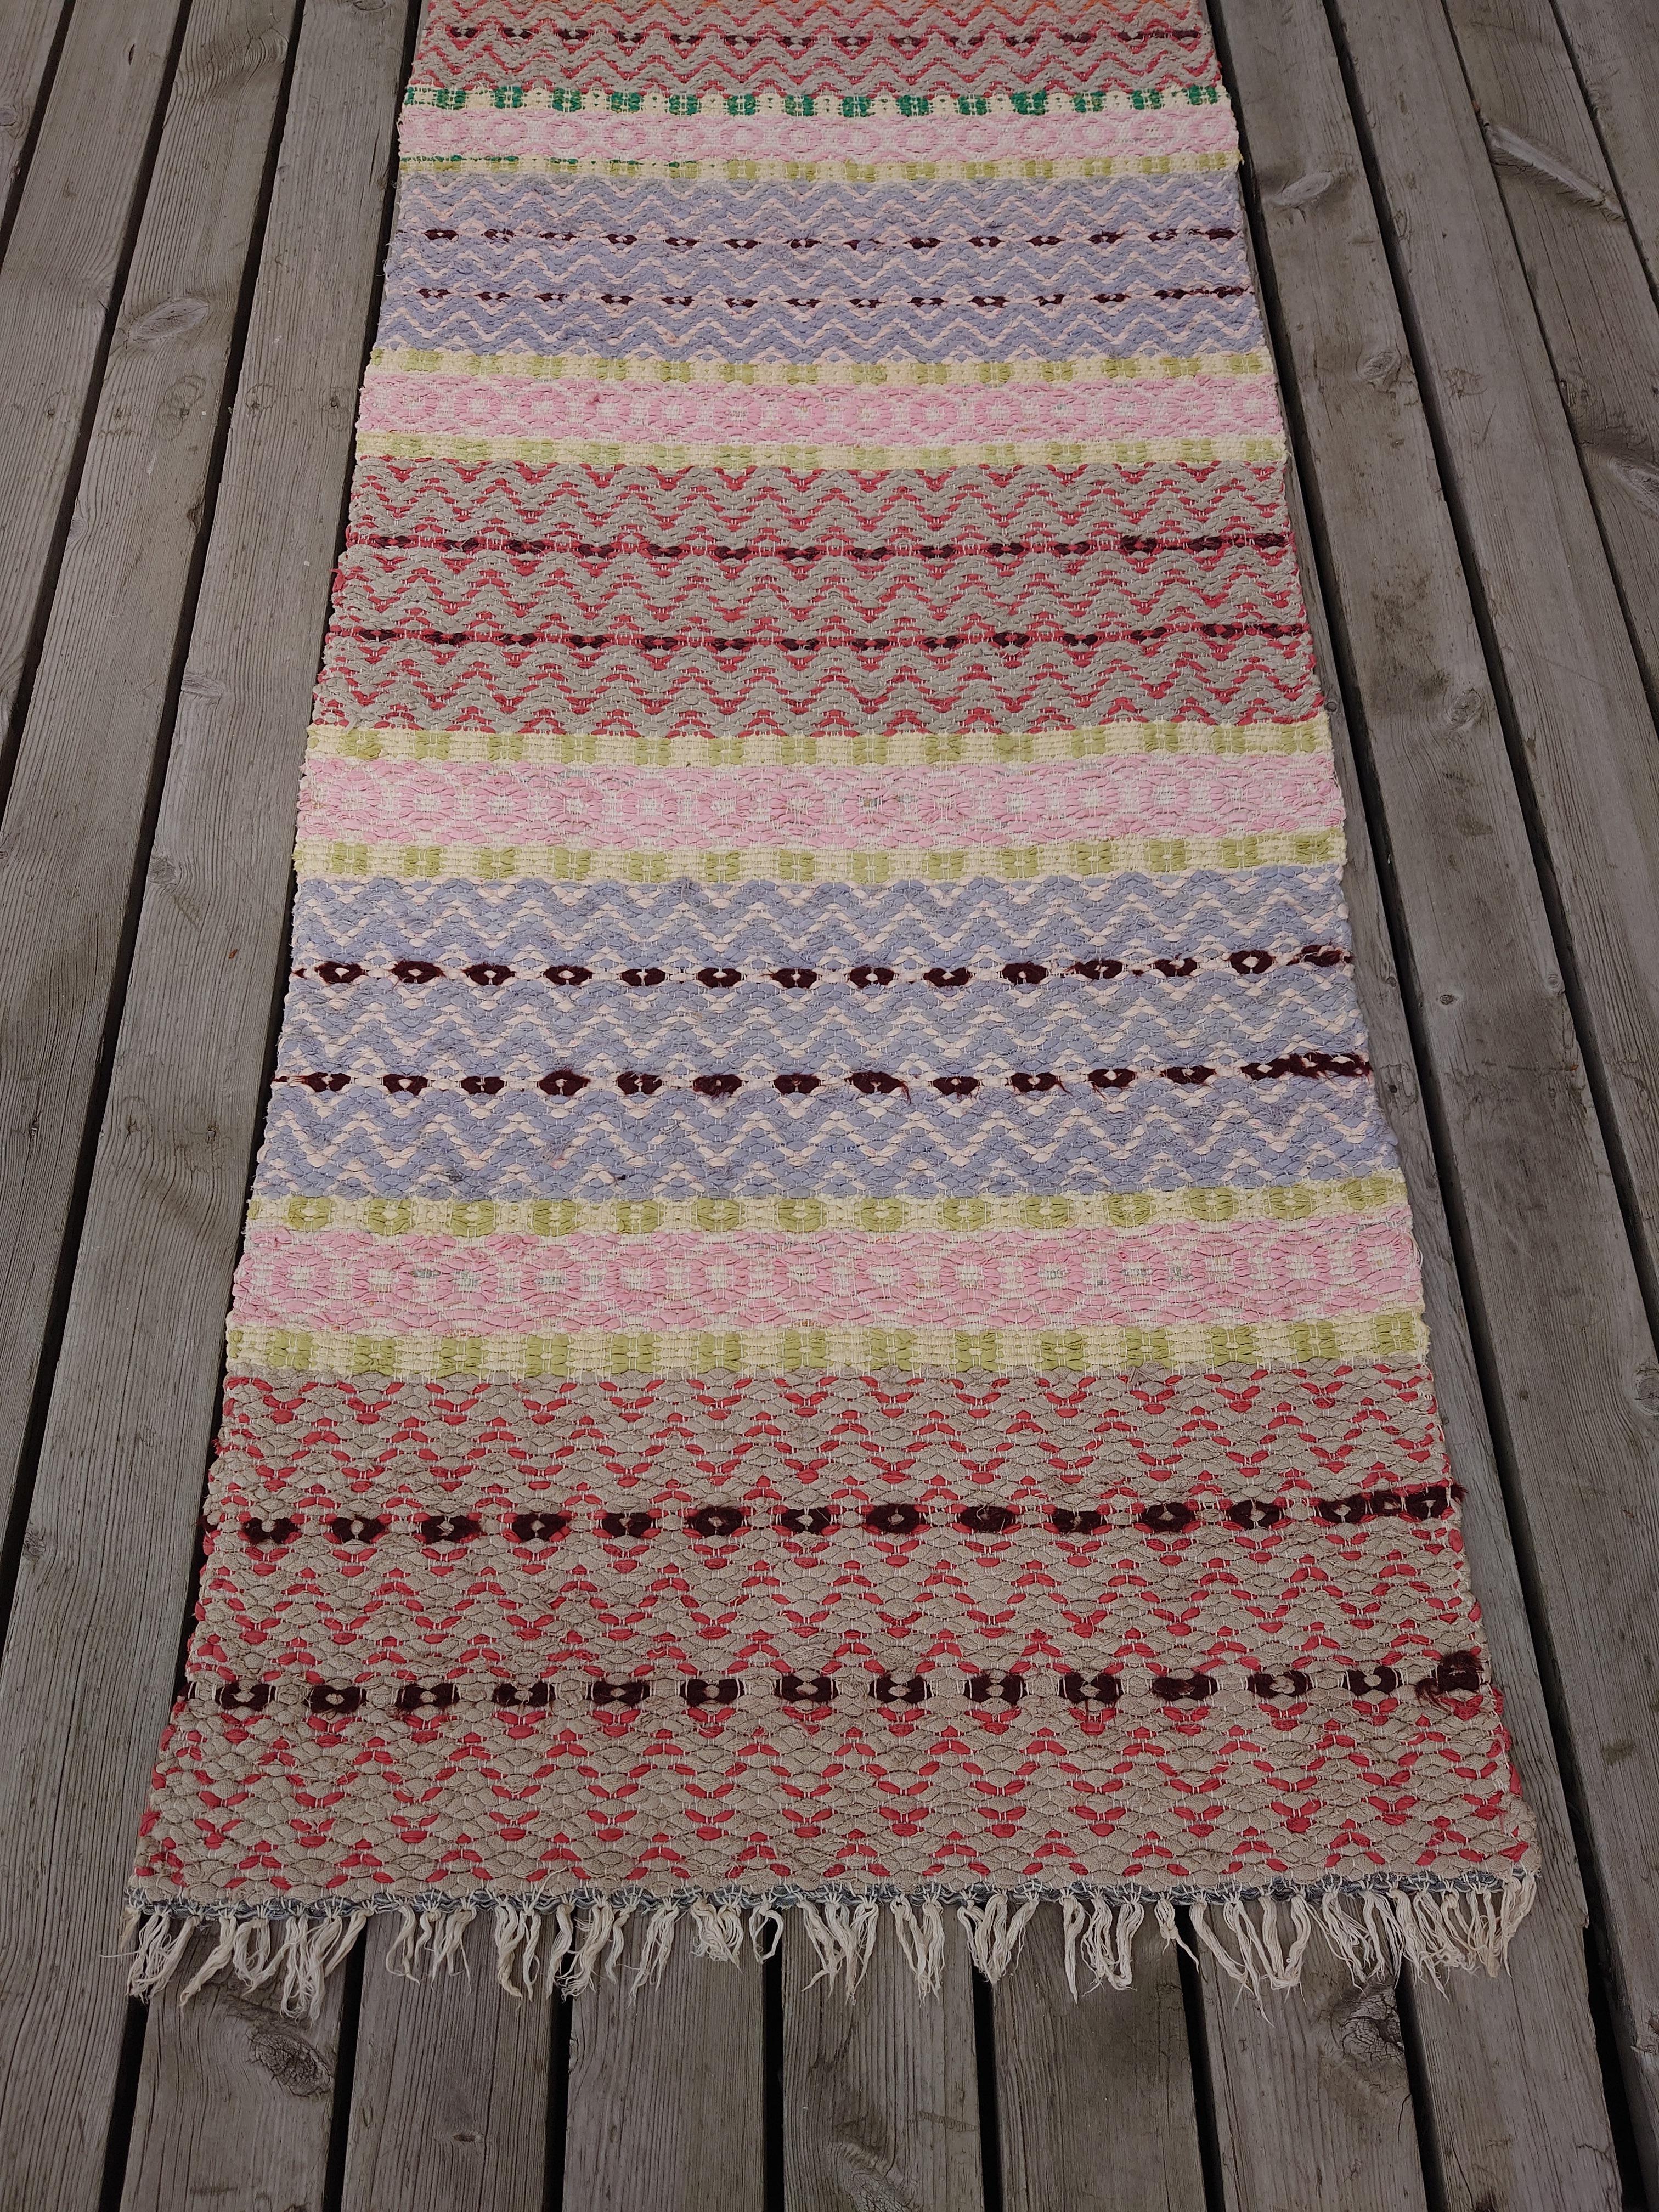 20th Century Swedish Rag Rug Hand Woven Pastel Color For Sale